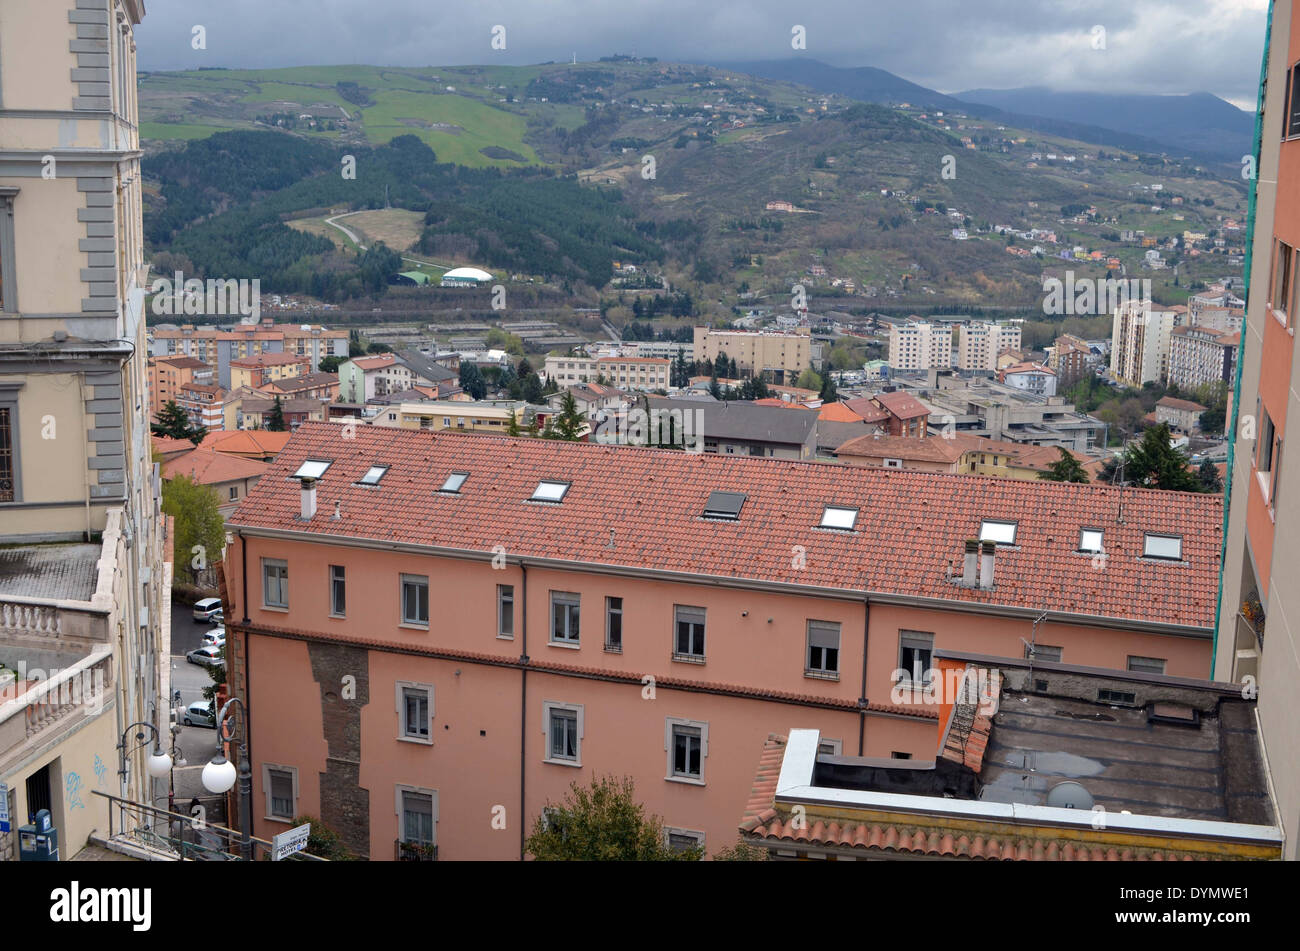 A view of Potenza from one of the highest pointsshows the Italian countryside in the background. Stock Photo